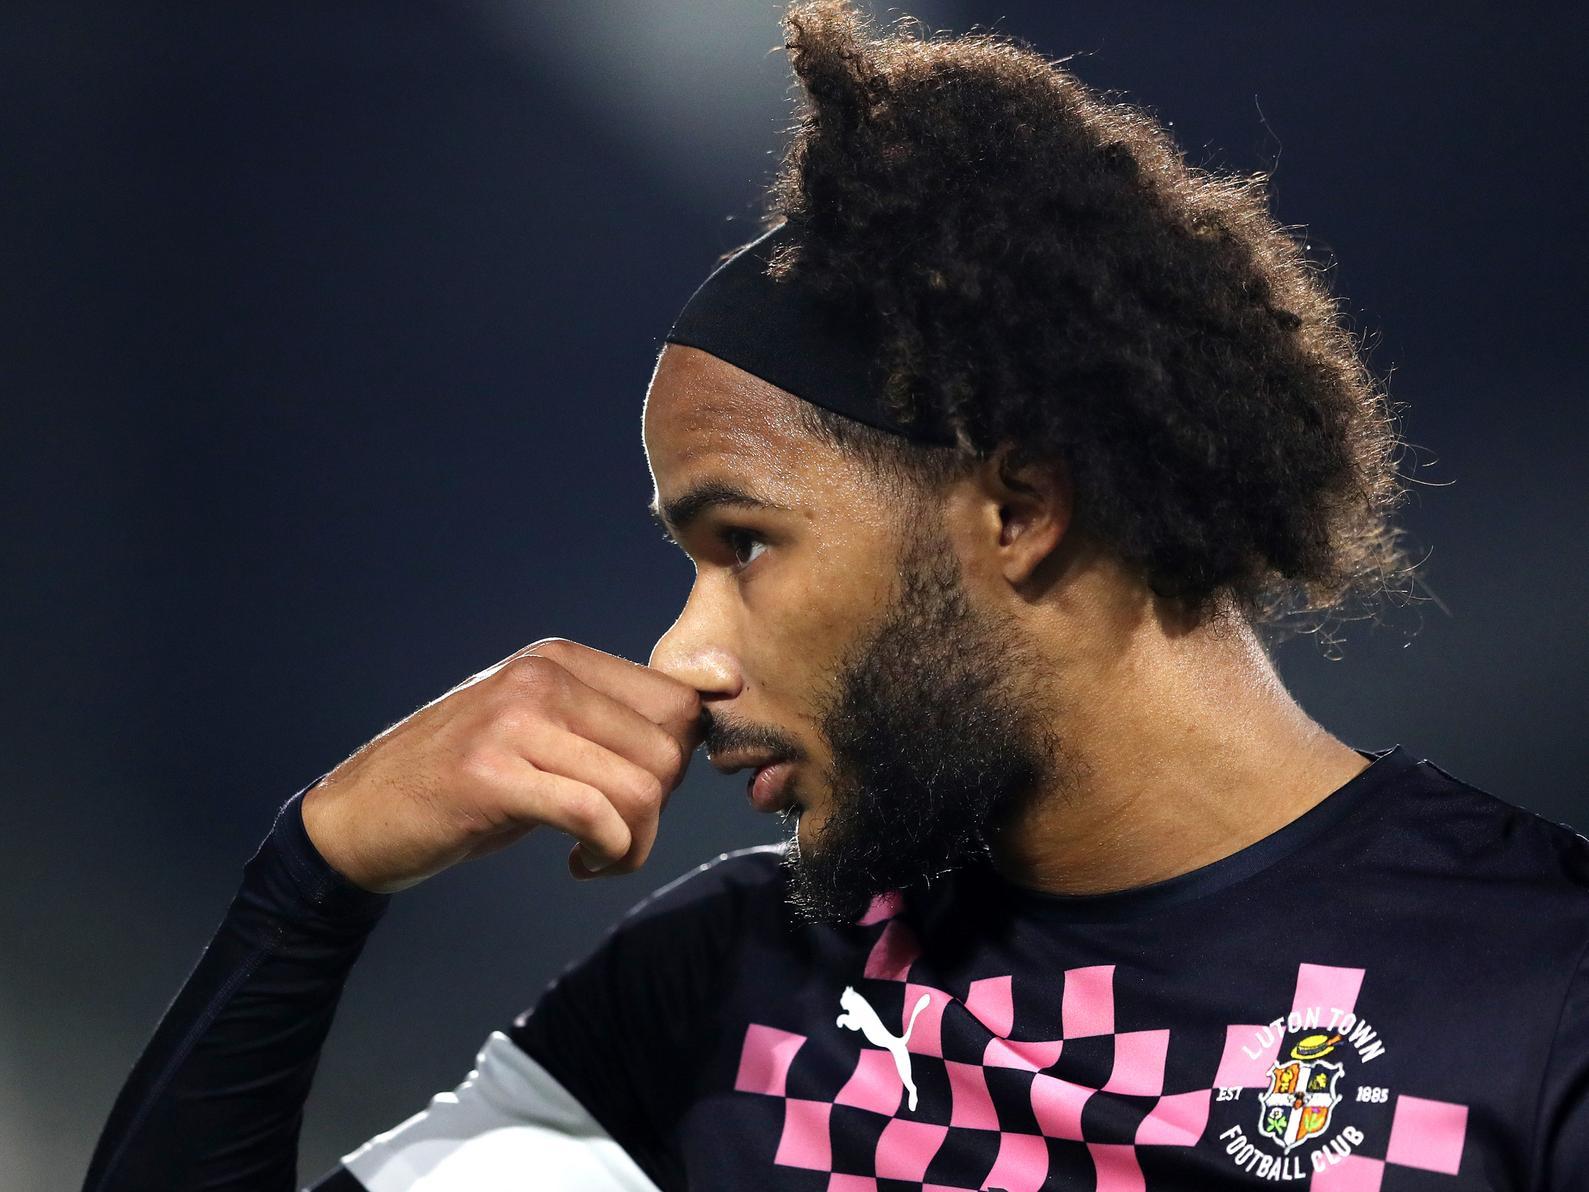 Luton Town manager Graeme Jones has claimed his team can't rely on star player Izzy Brown for the whole season, and that he'll be looking to strengthen his squad considerably in January. (The 72)